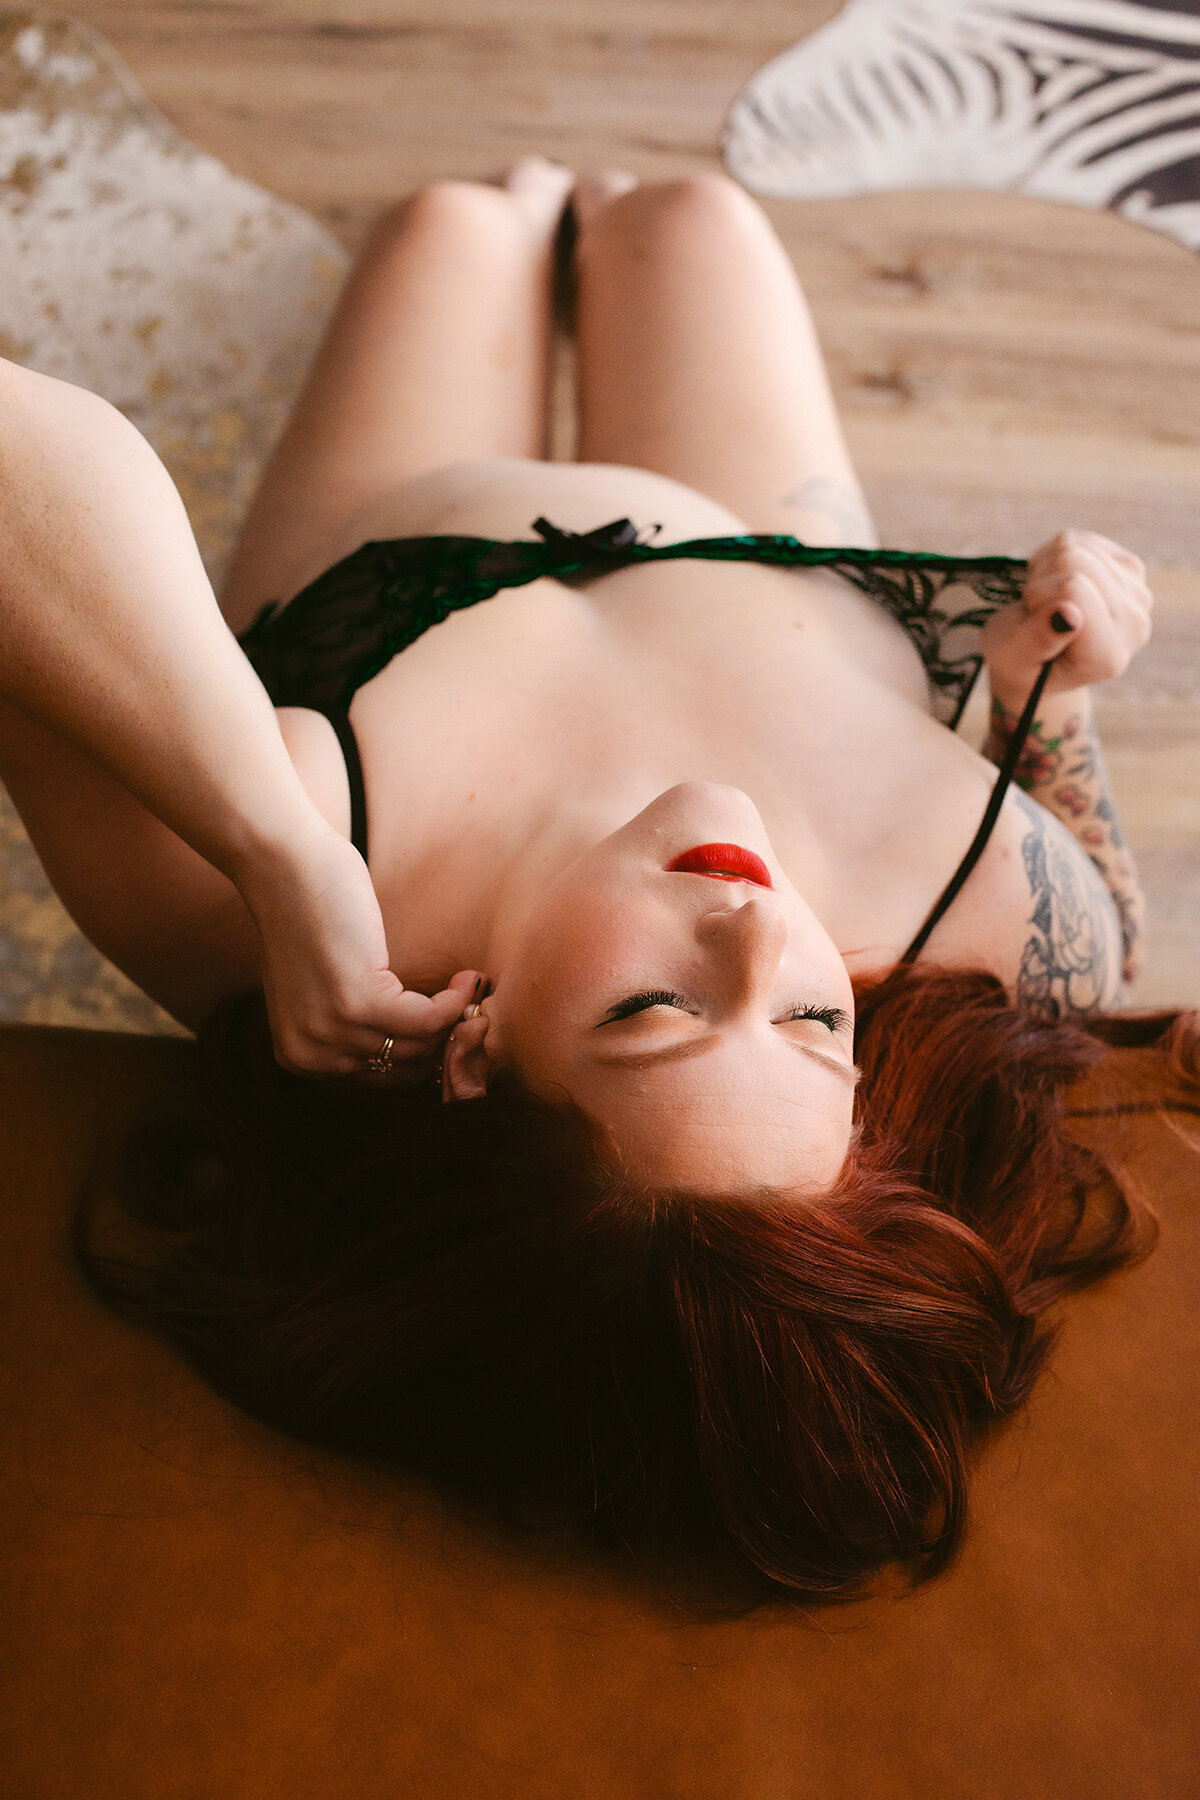 A woman seductively pulls at her green lingerie at a Bentonville Boudoir studio.